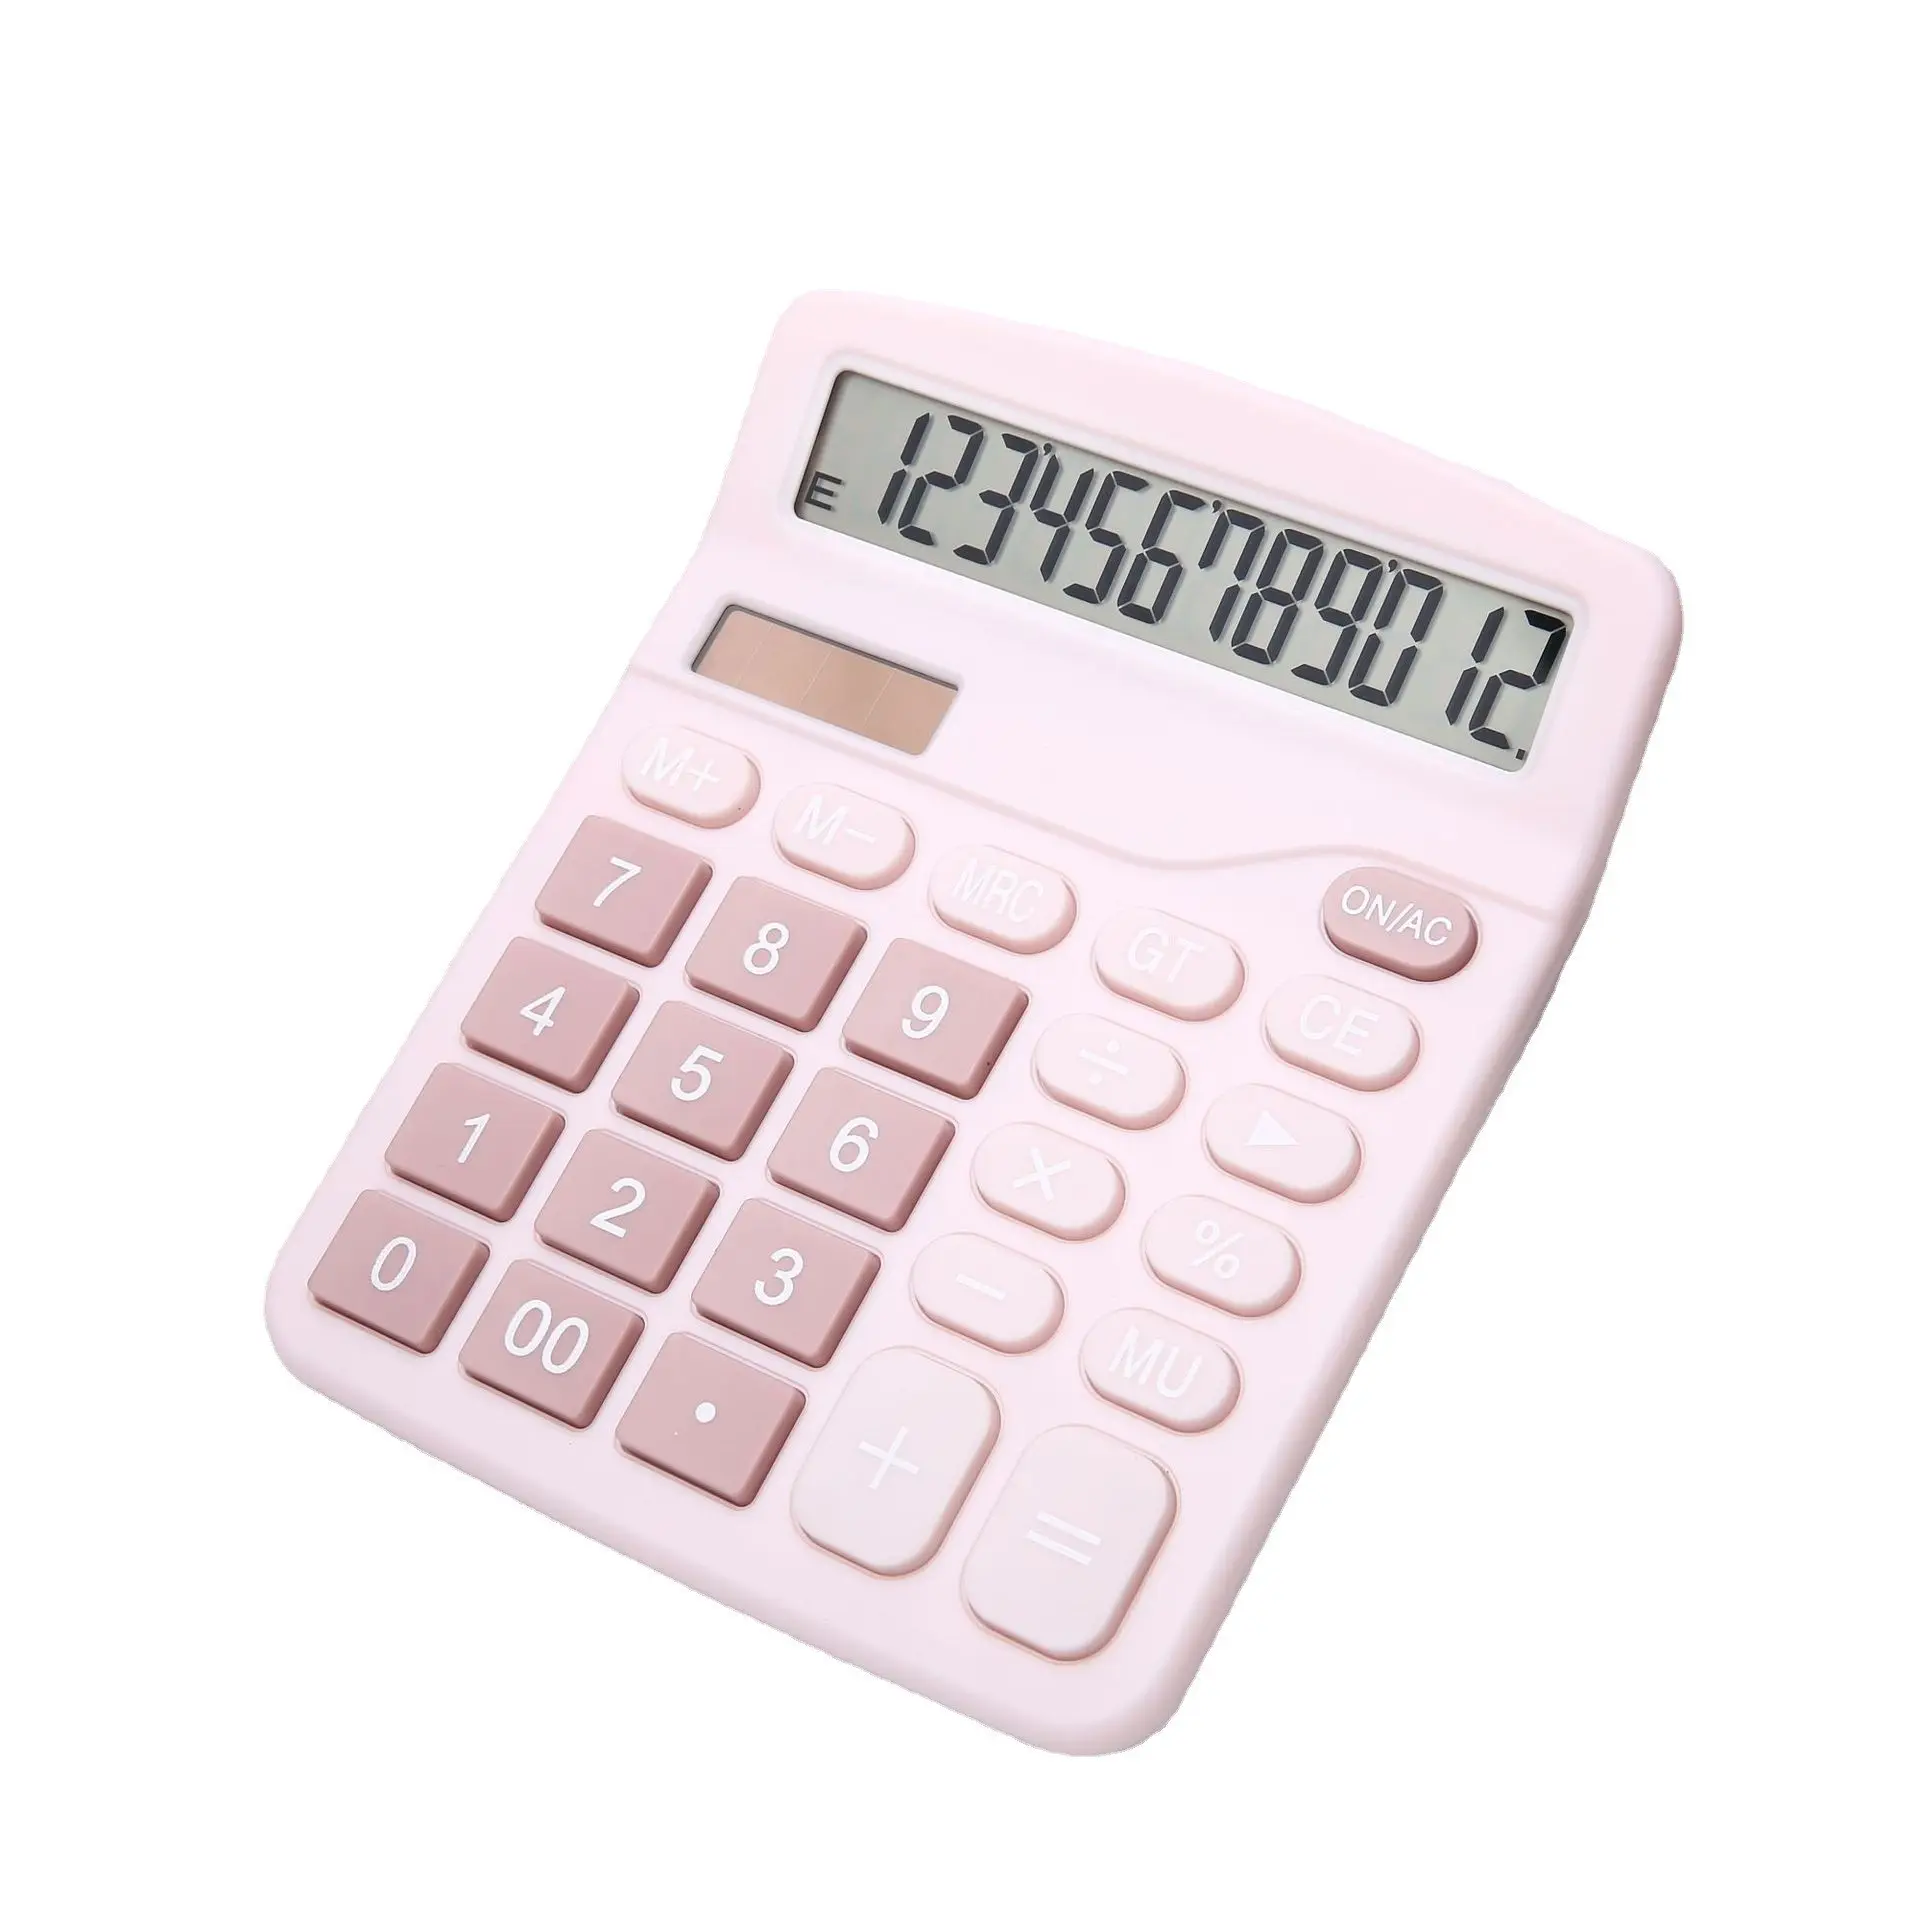 12 Digits Electronic Calculator And AA Battery Dual Power Calculator Office Financial Basic Desk Calculator-Pink